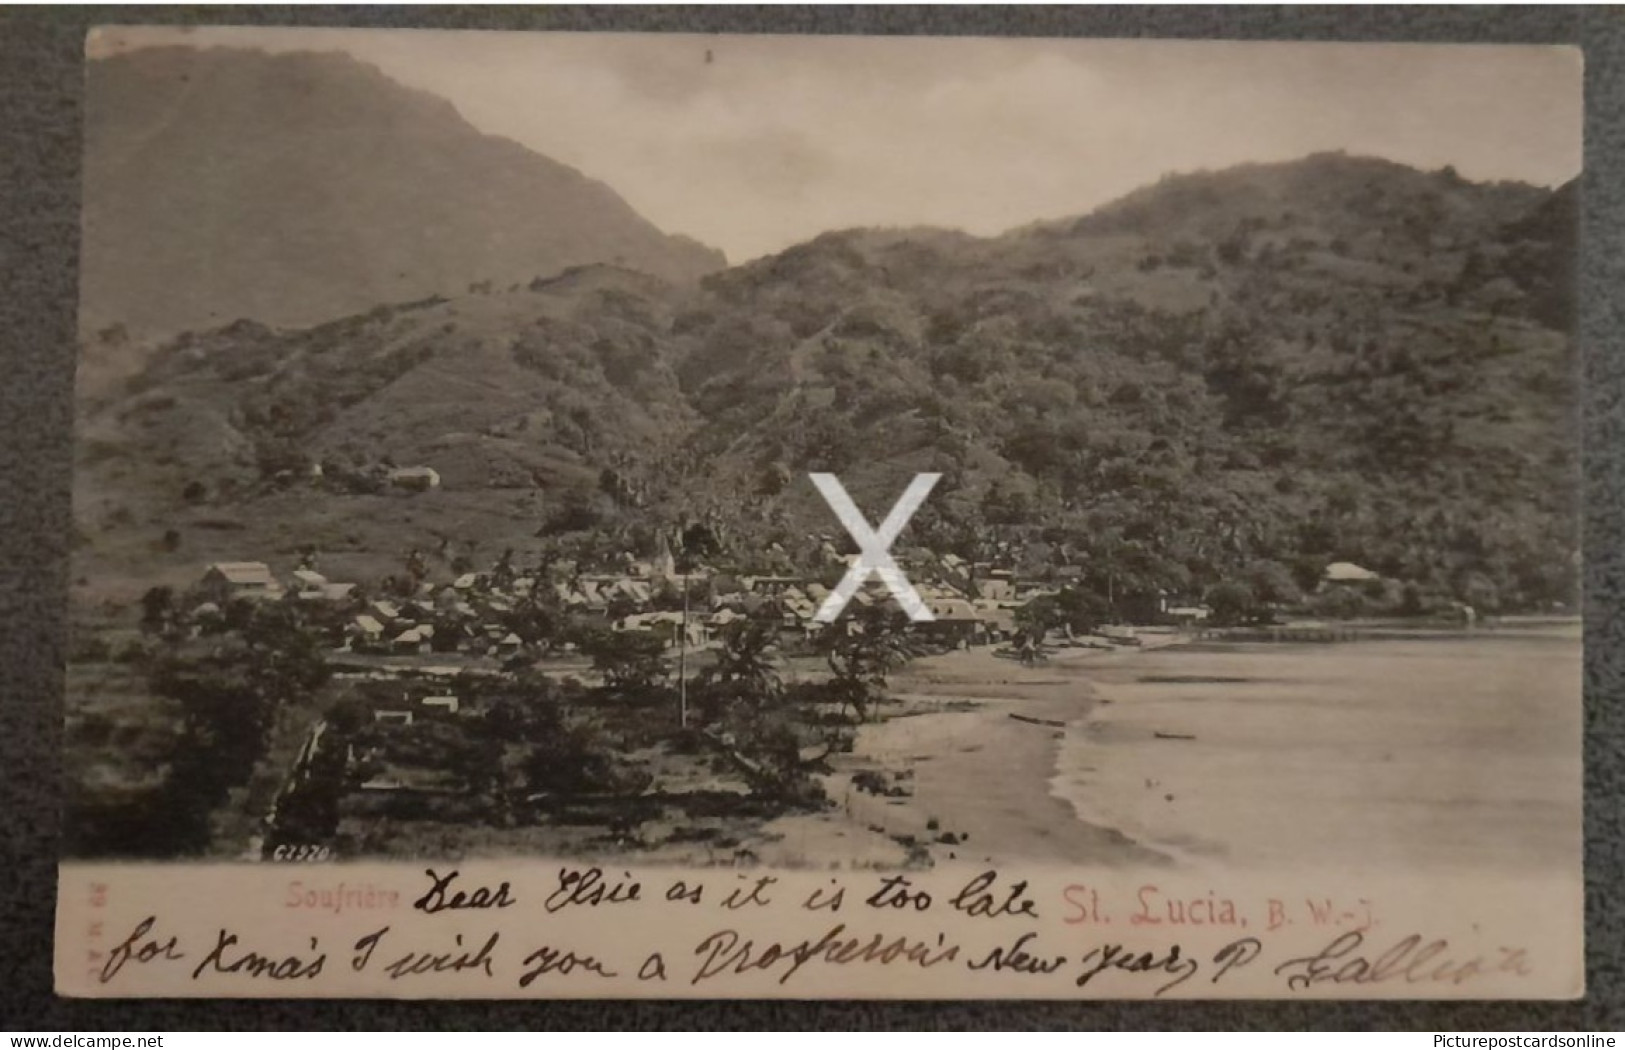 ST LUCIA SOUFRIERE NICE OLD B/W POSTCARD ANTILLES AMERICA POSTED TO GUERNSEY - Santa Lucía